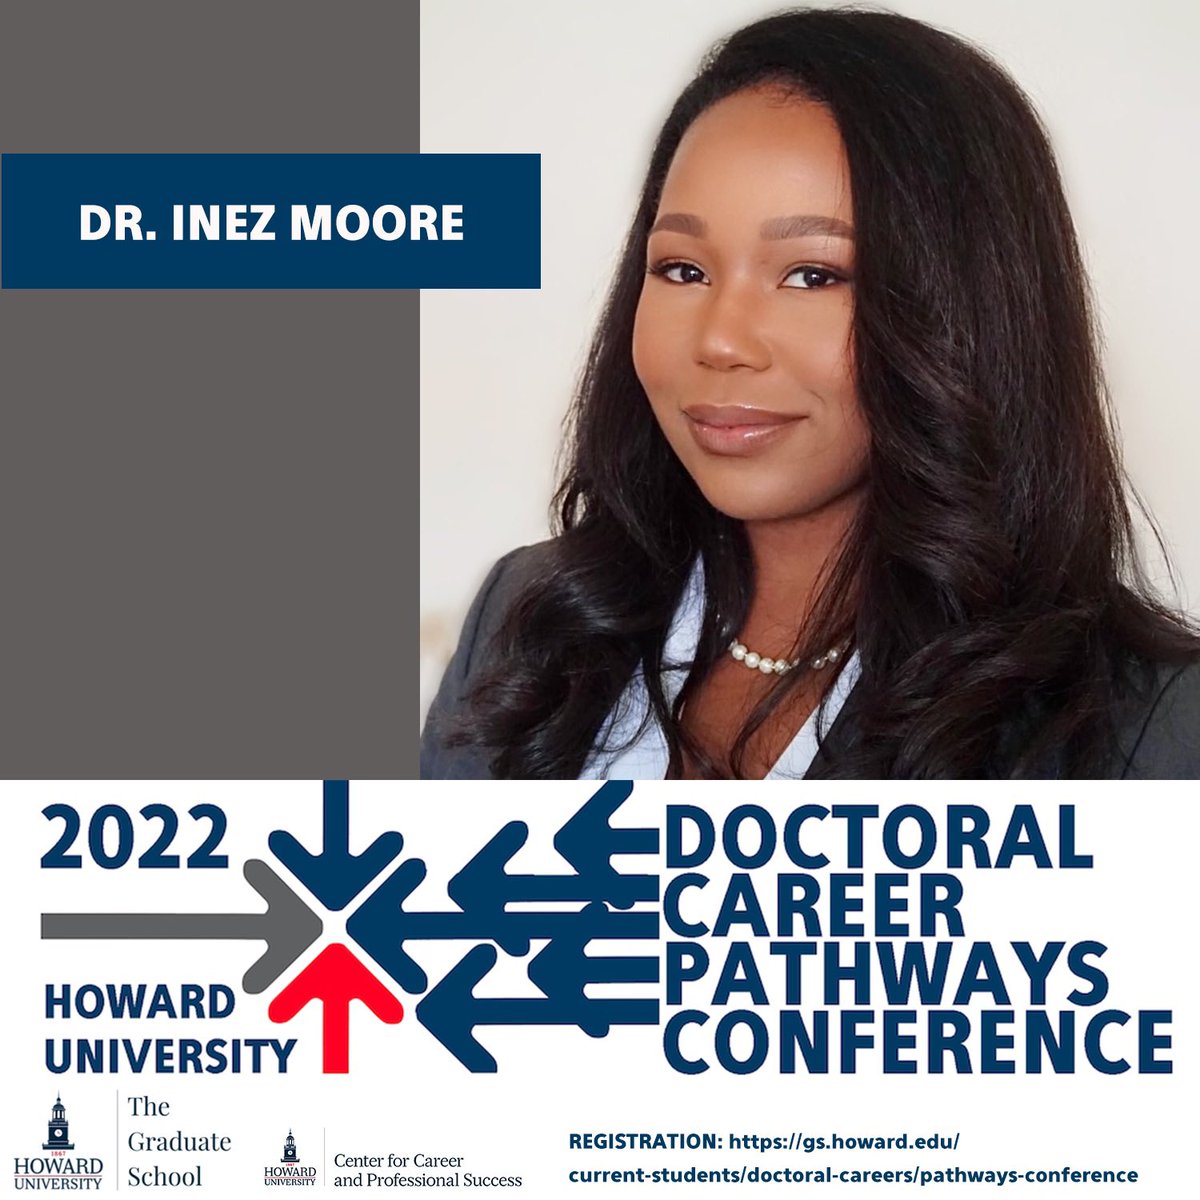 Looking forward to Dr Inez Moore (@RCCSocialmedia) as panelist on #educationcareers at the Doctoral Career Pathways Conference. @DWill5 @HowardCCPS @HowardUAlumni #HUDocAlumni #doctoralcareers